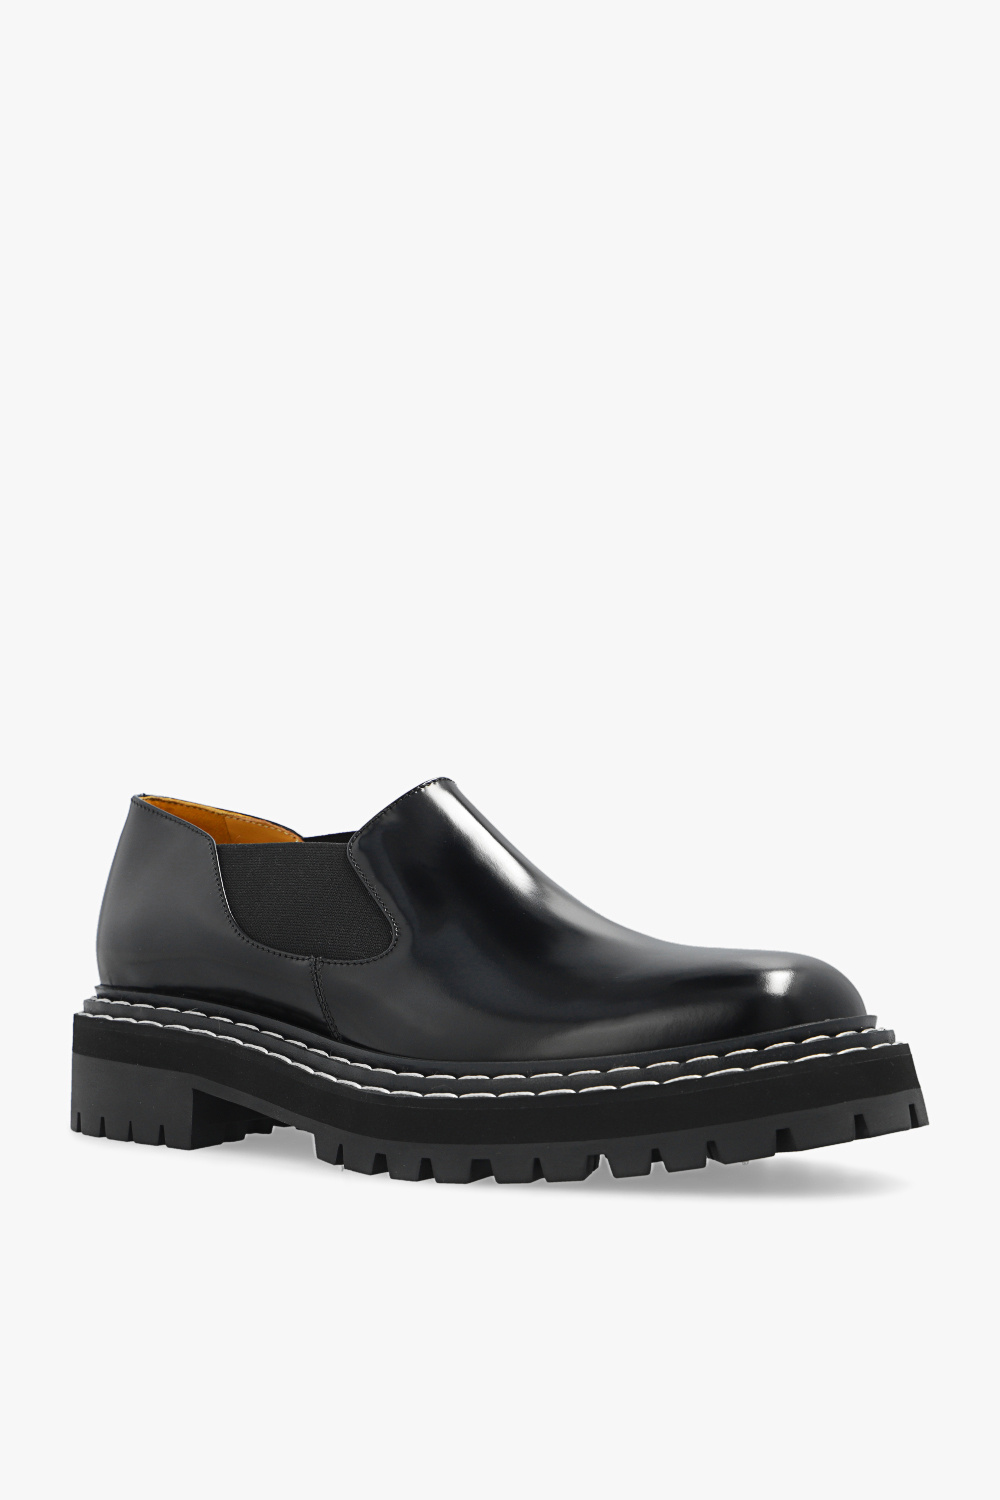 Proenza Schouler Leather slip-on shoes